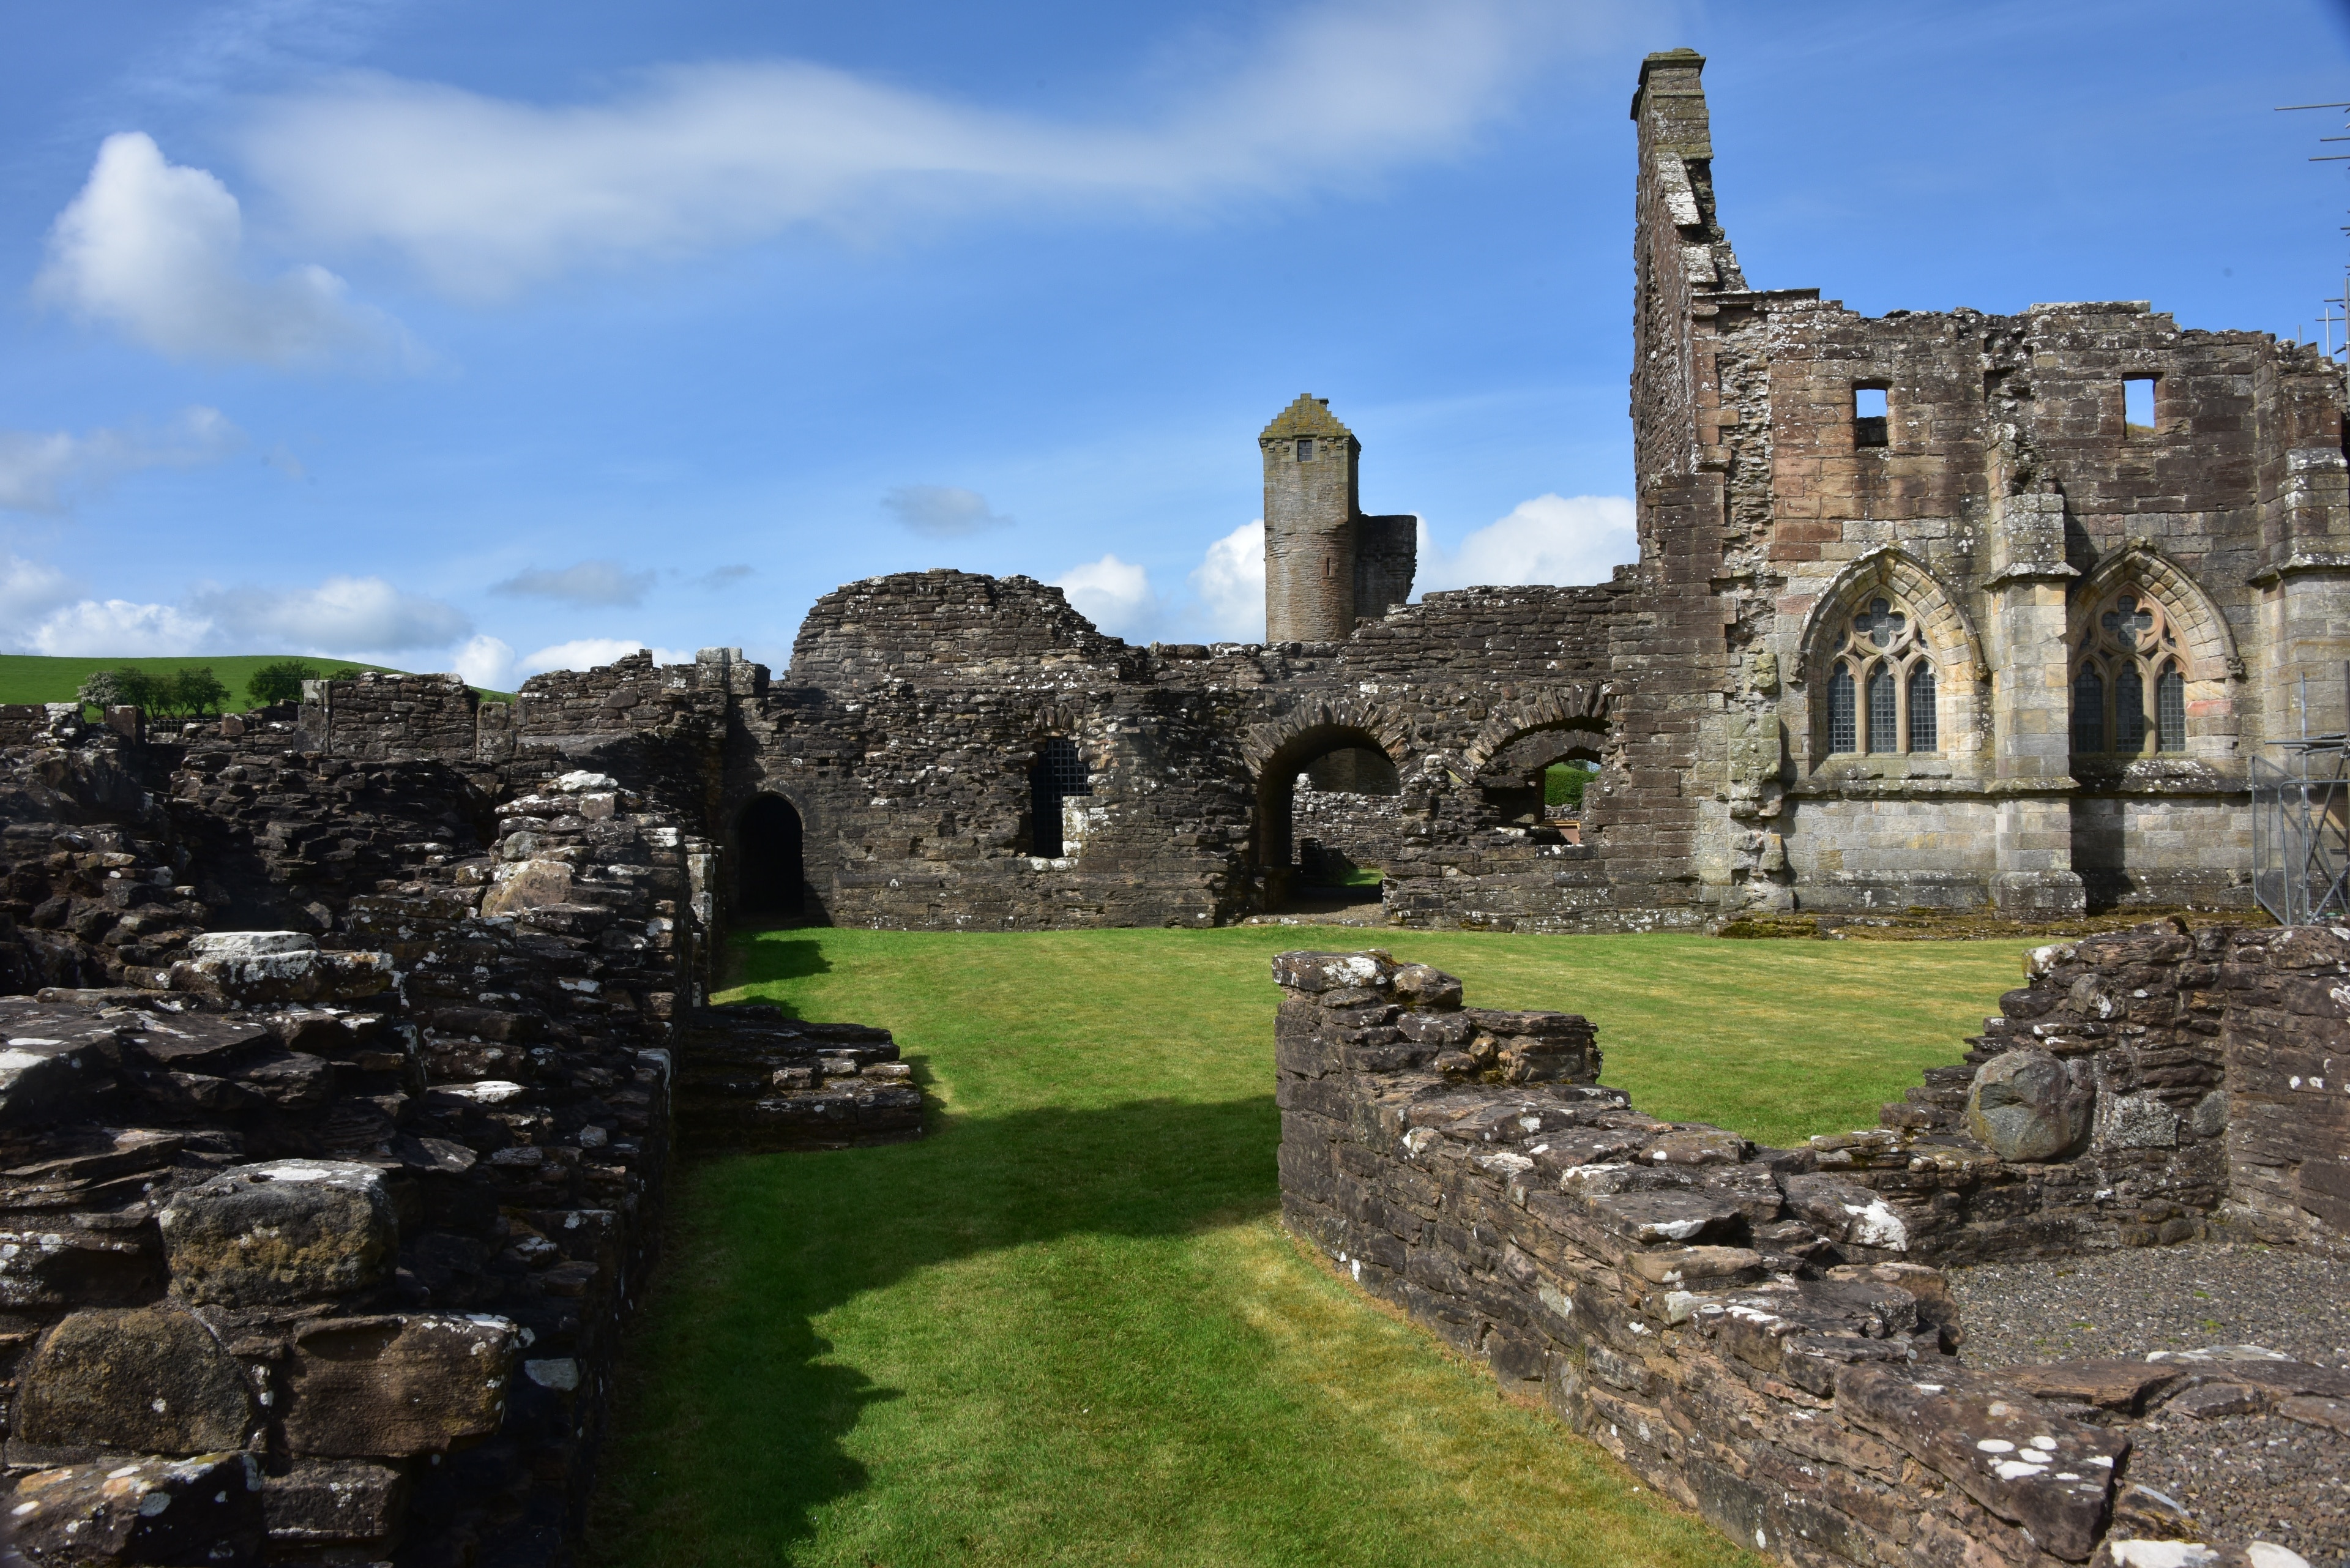 The ruins of Crossraguel Abbey, a medieval Cluniac foundation in Ayrshire.